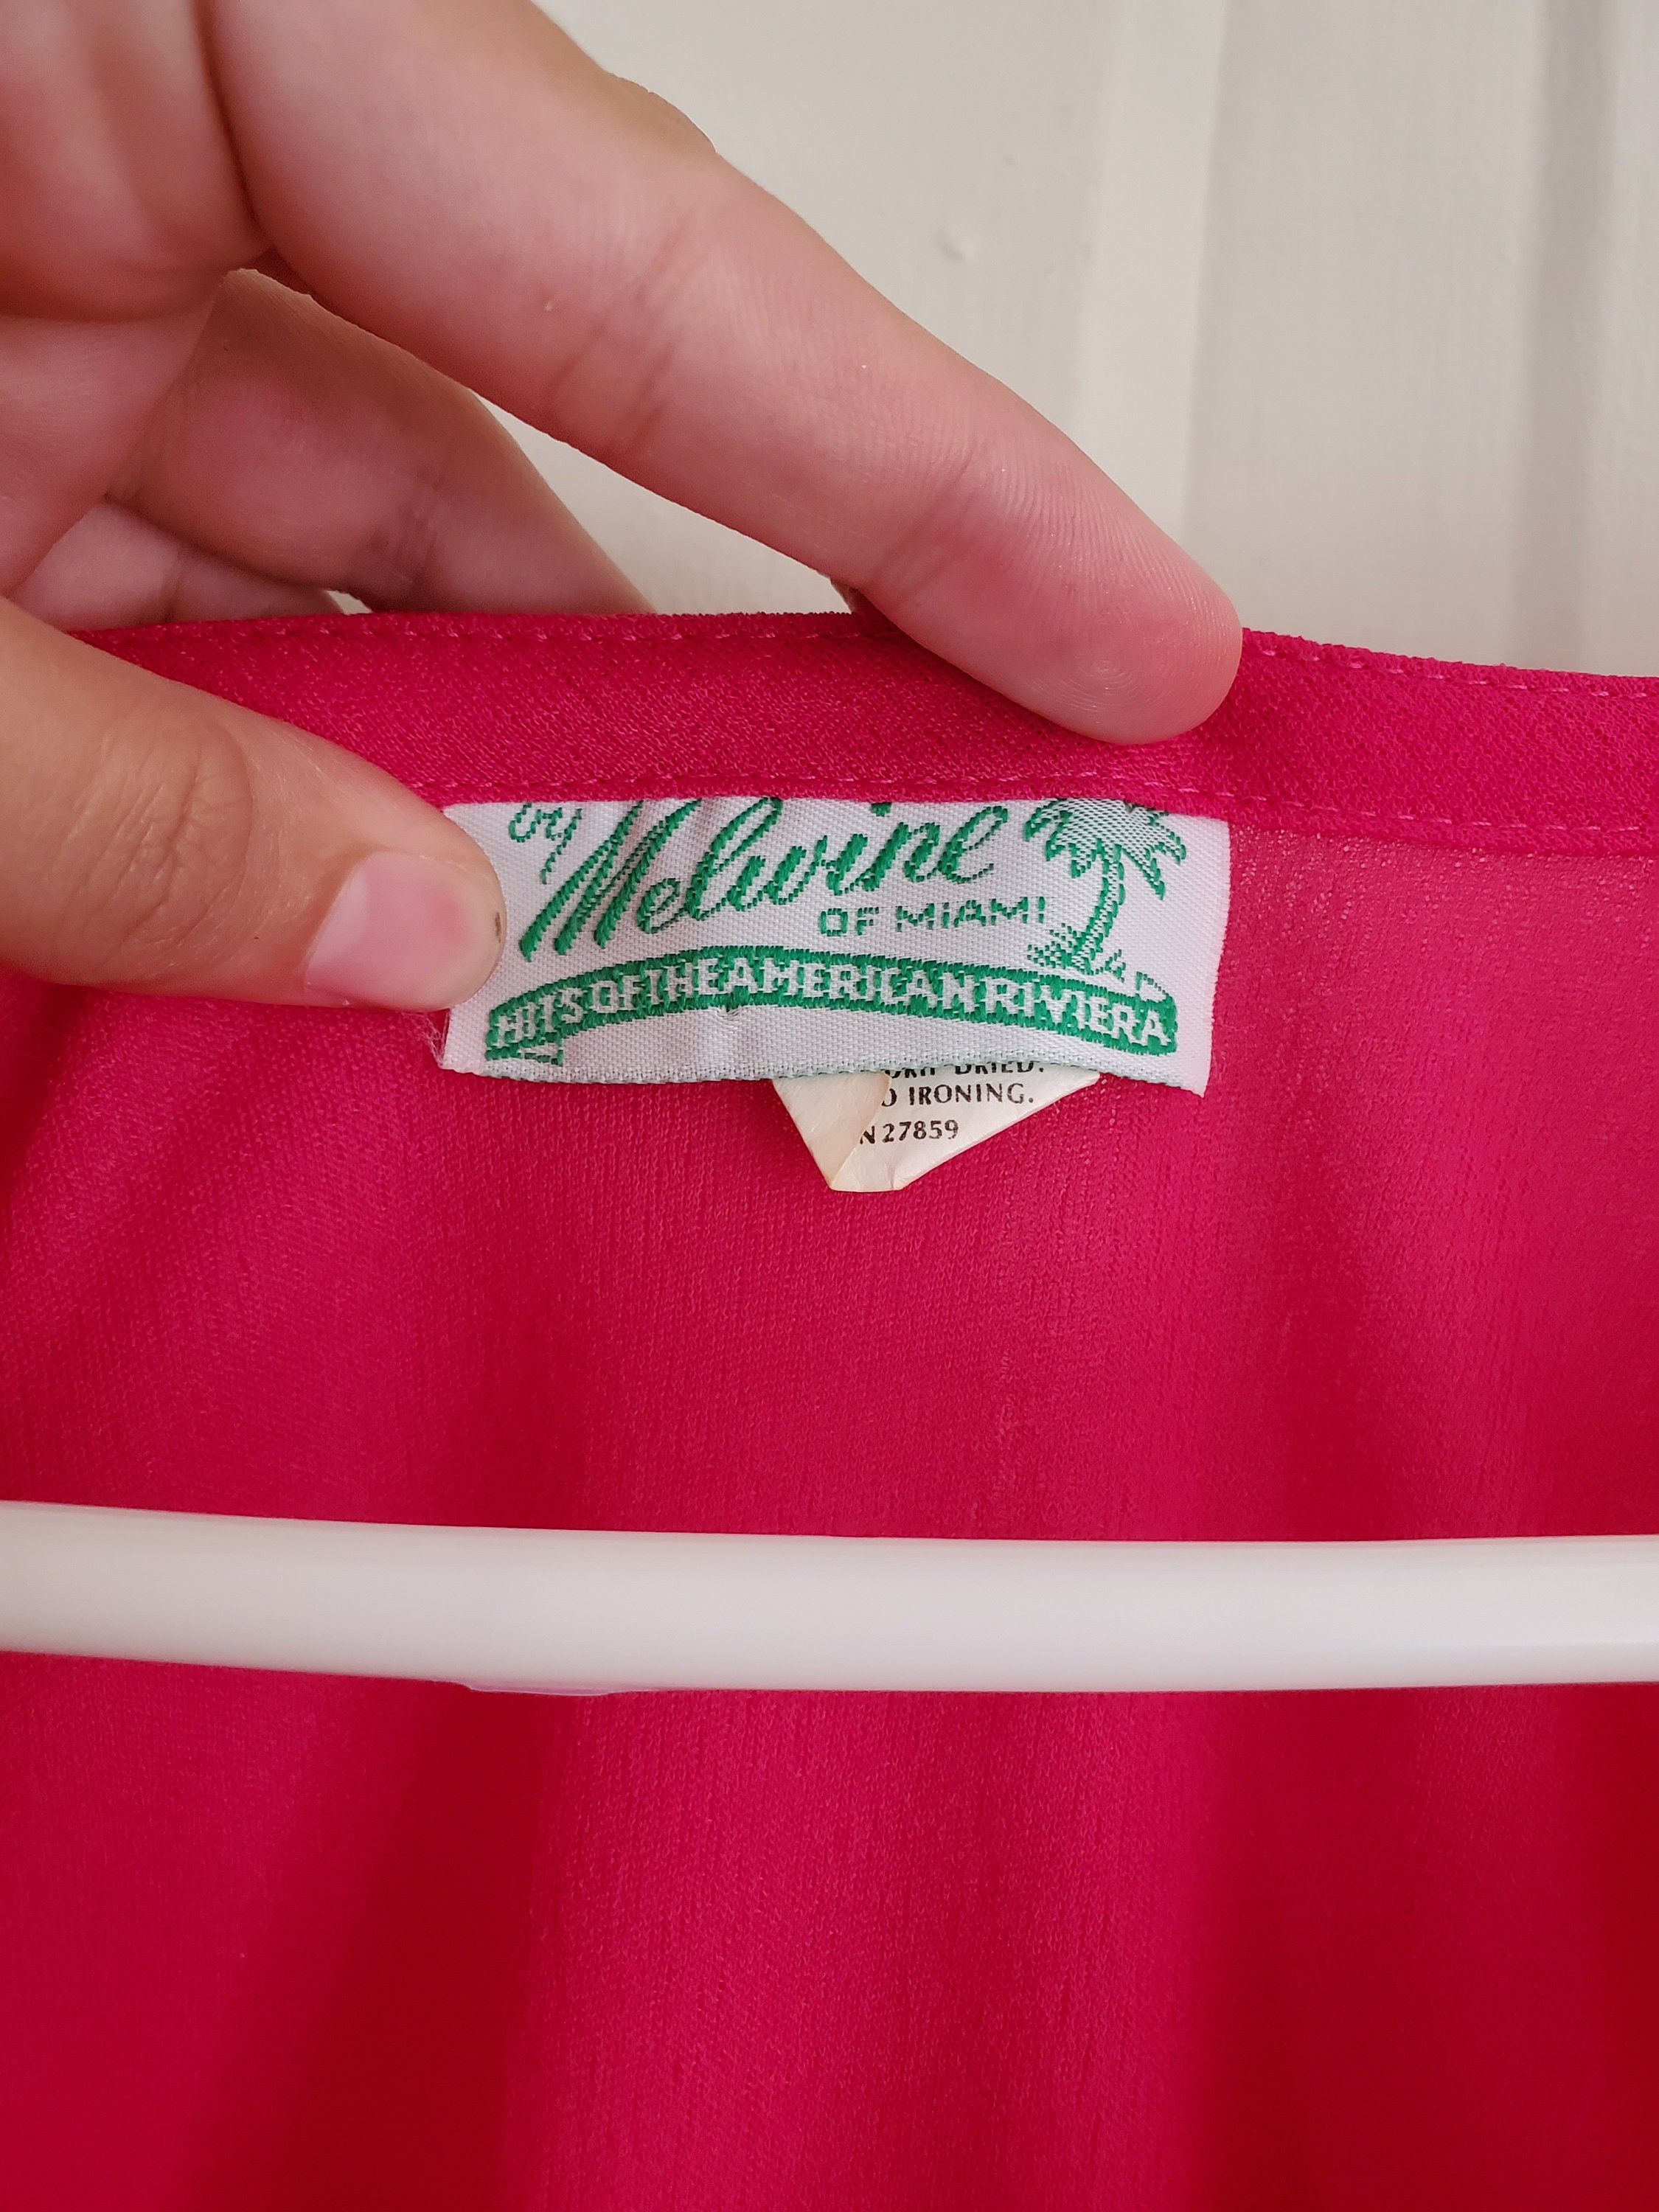 Retro Vintage 1970s 1980s Hot Pink Beach Dress by Melwine of | Etsy